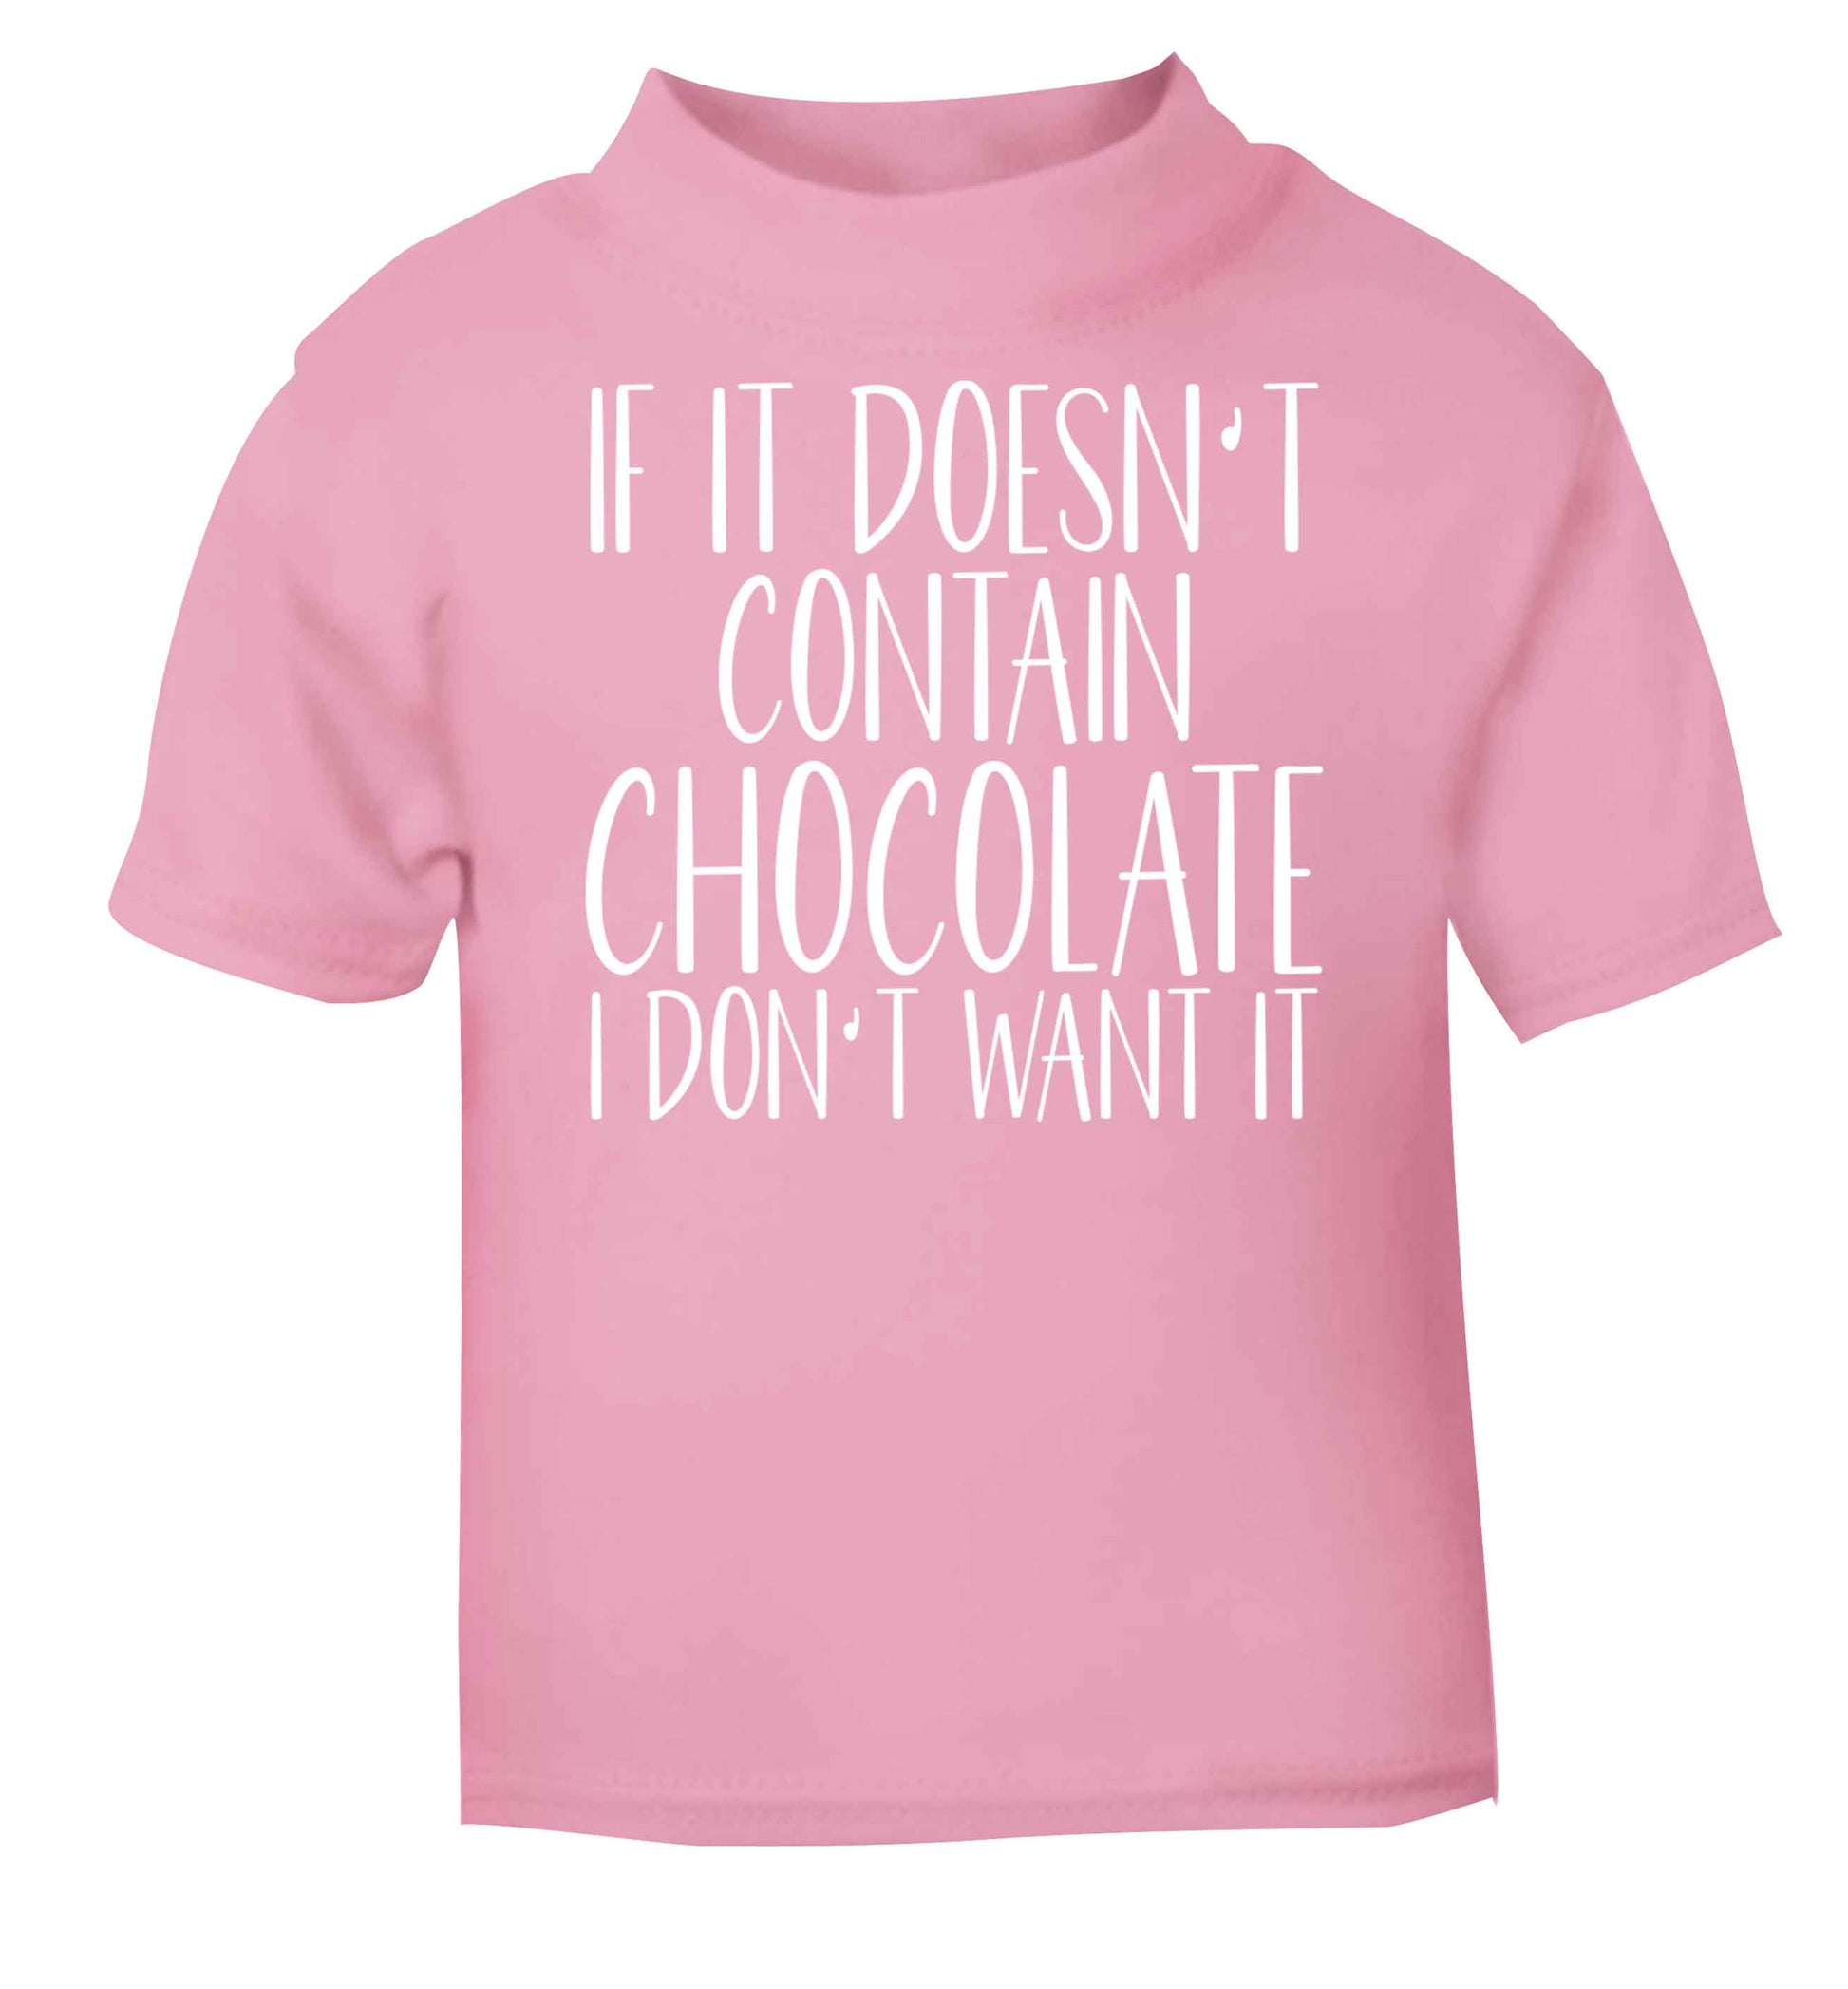 If it doesn't contain chocolate I don't want it light pink baby toddler Tshirt 2 Years